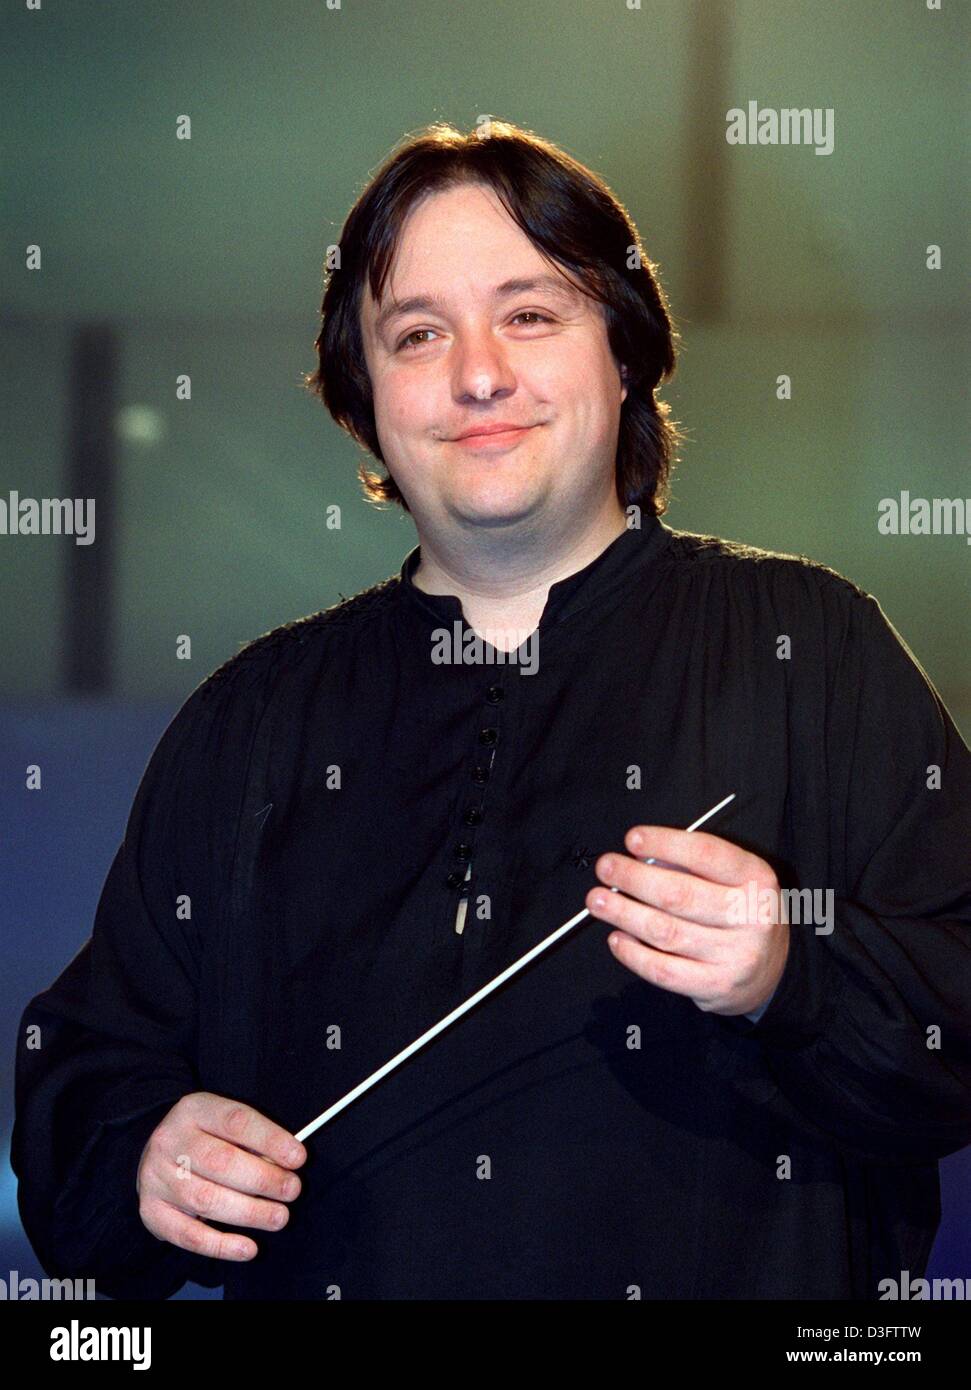 (dpa) - Swiss conductor Stefan Blunier poses with his baton in Berlin, 4 March 2003. The 39-year-old conductor has been general music director of the Staatstheater (state theatre) in Darmstadt, Germany, since the 2001/2002 season and is also collaborating with several orchestras of broadcasting stations. Stock Photo